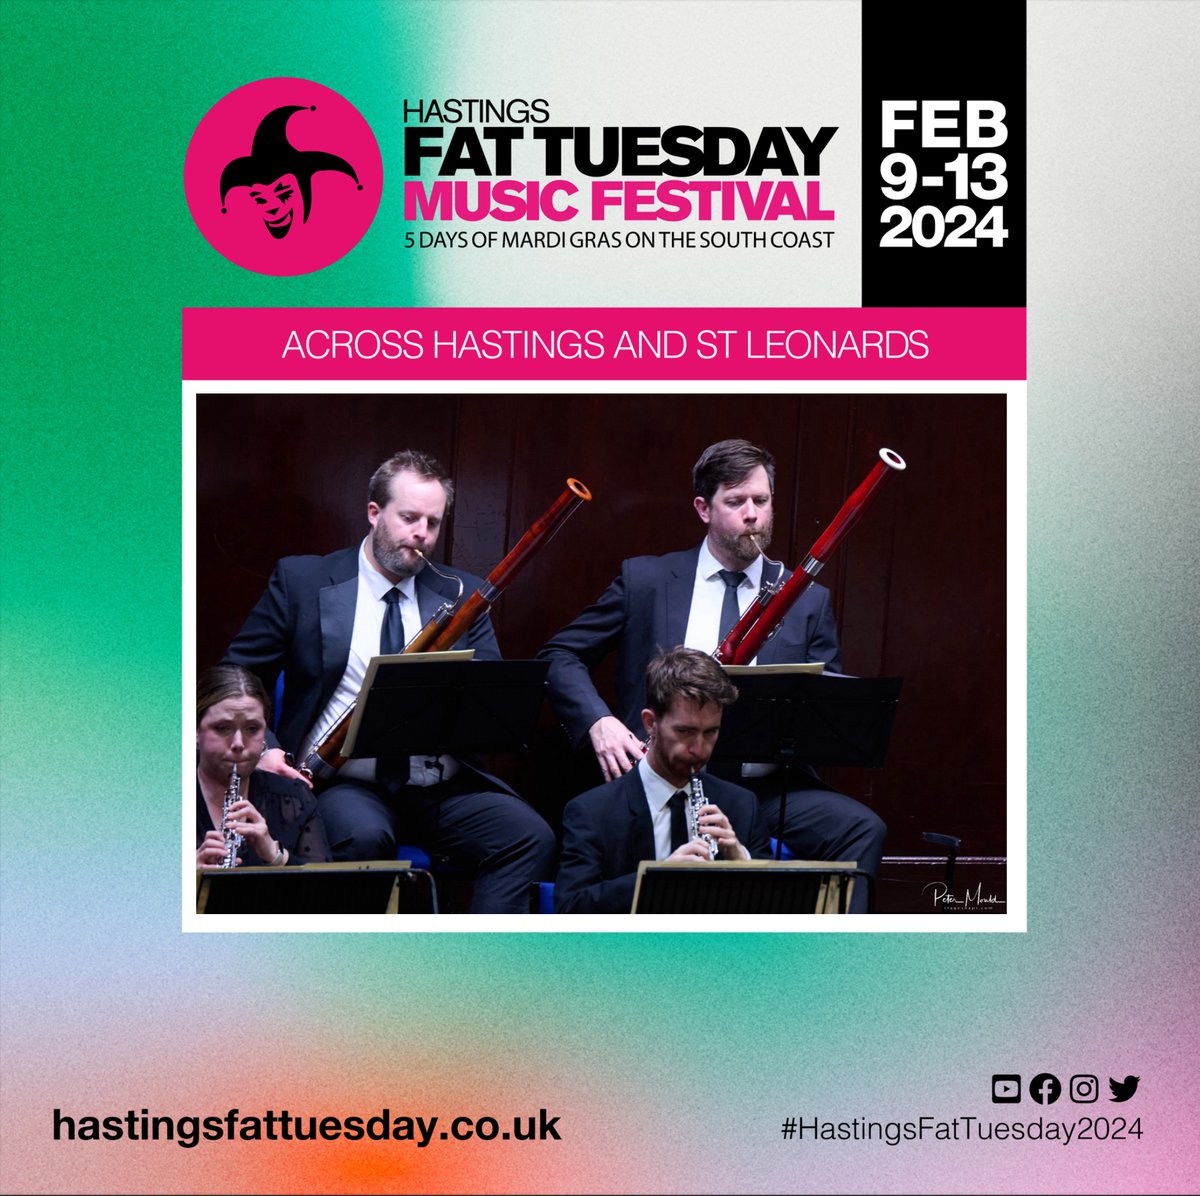 We are delighted to announce that the #HPOWindQuintet are part of the incredible lineup for the HASTINGS FAT TUESDAY FESTIVAL 2024! 👏 Thank you to @Hastingsfattues for including us in the exciting festival this year! 🥳 More info to follow... 👀 #hft2024 - 15th Anniversary